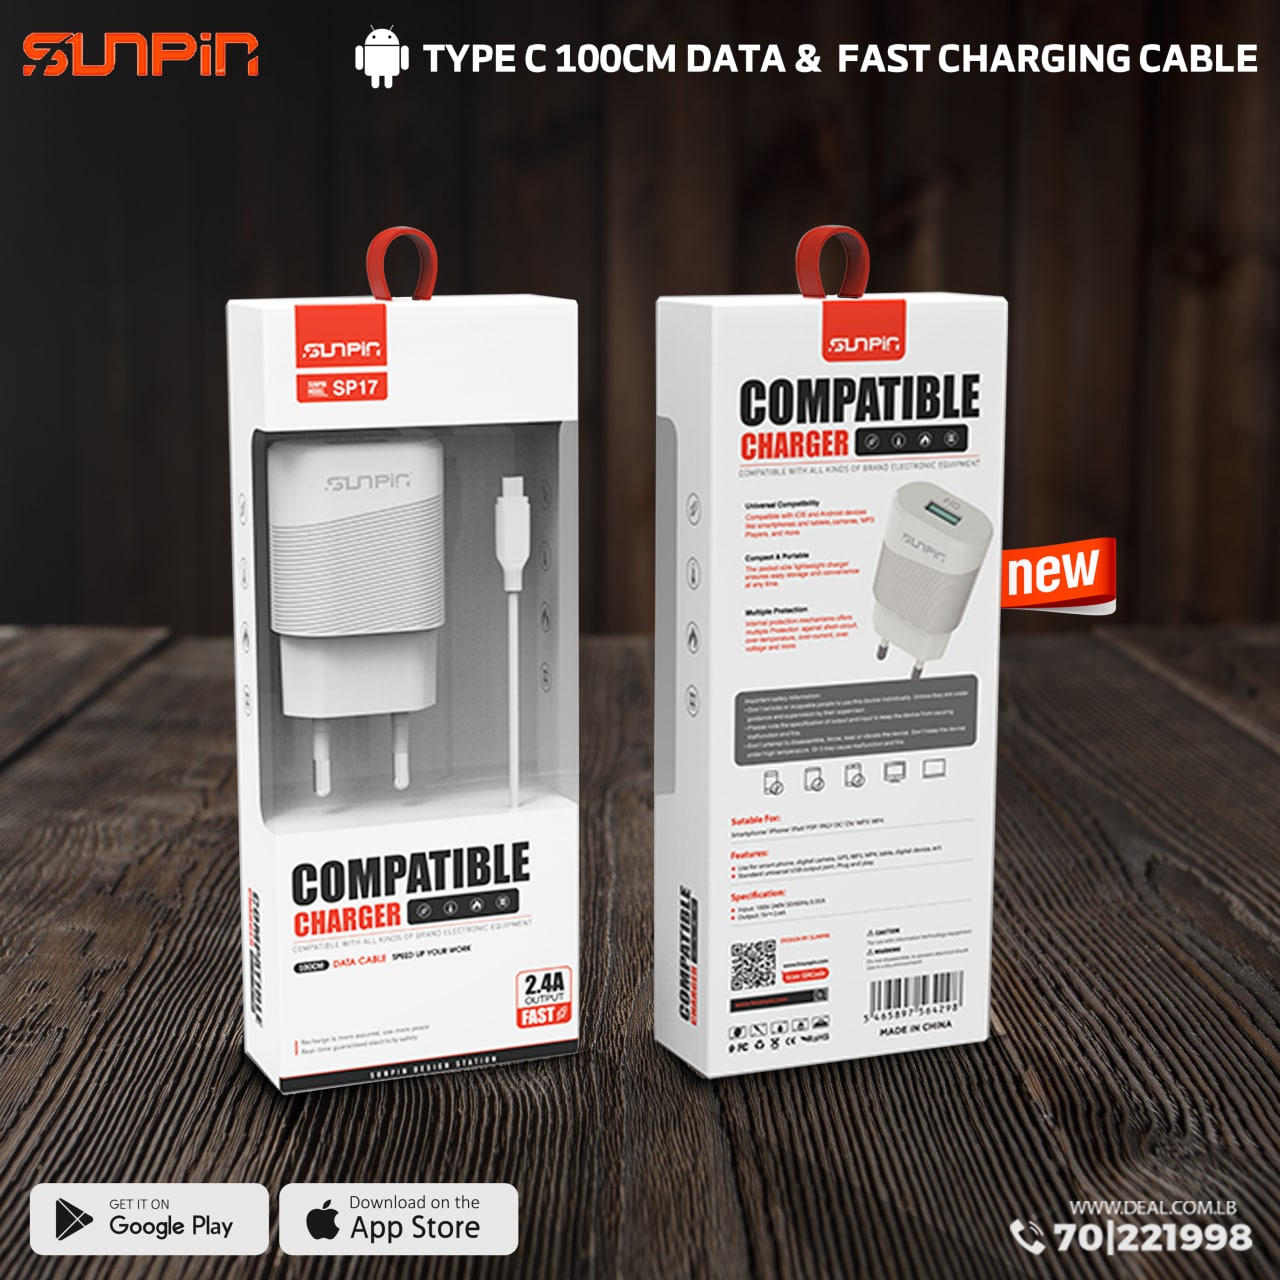 Sunpin+SP17+Type-C+100CM+Data+%26+Fast+Charging+Cable+2.4A+OUTPUT